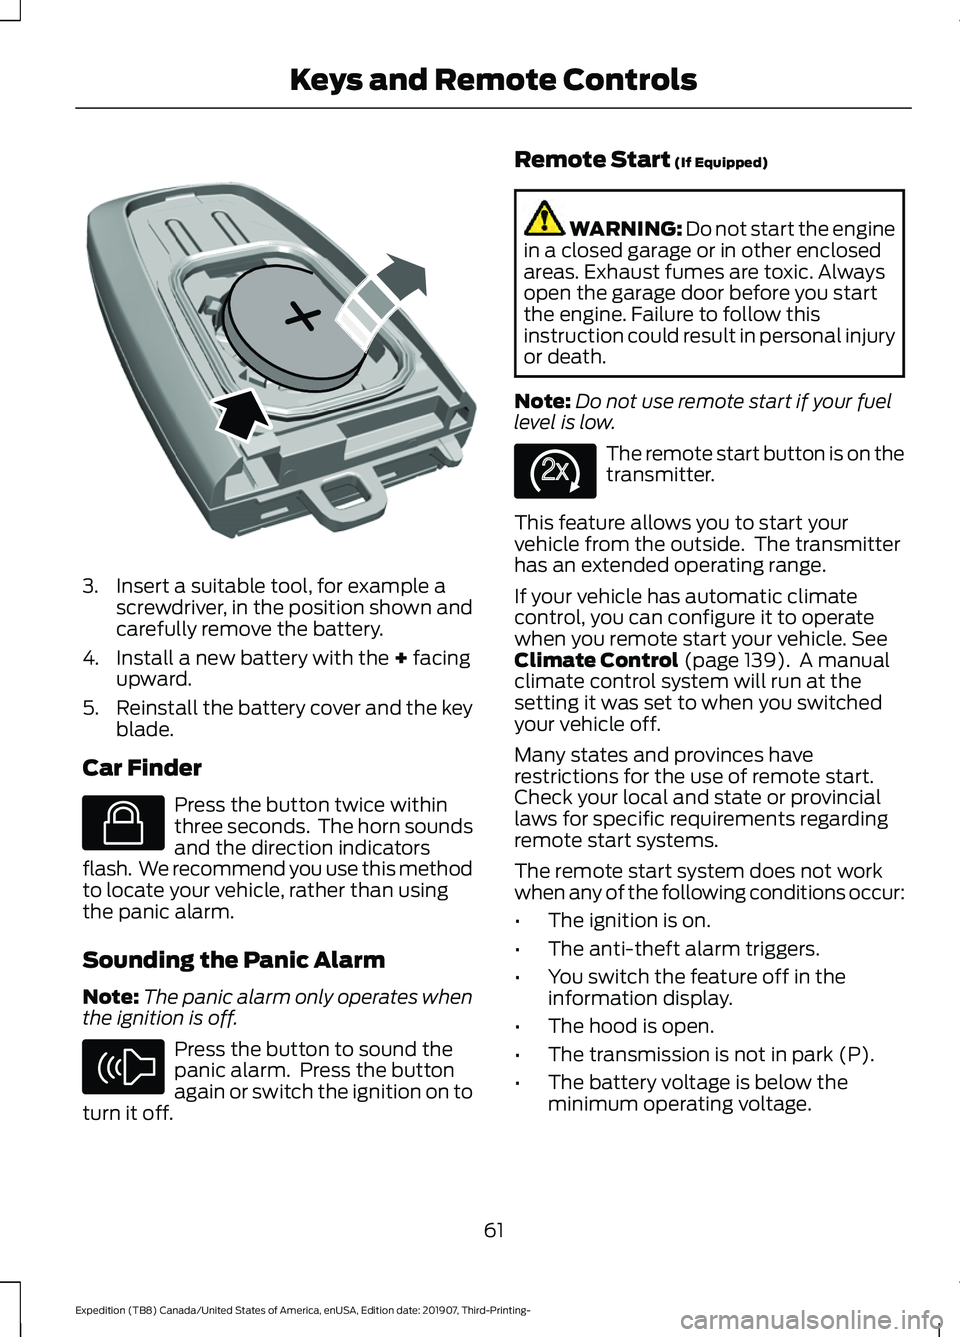 FORD EXPEDITION 2020  Owners Manual 3. Insert a suitable tool, for example a
screwdriver, in the position shown and
carefully remove the battery.
4. Install a new battery with the + facing
upward.
5. Reinstall the battery cover and the 